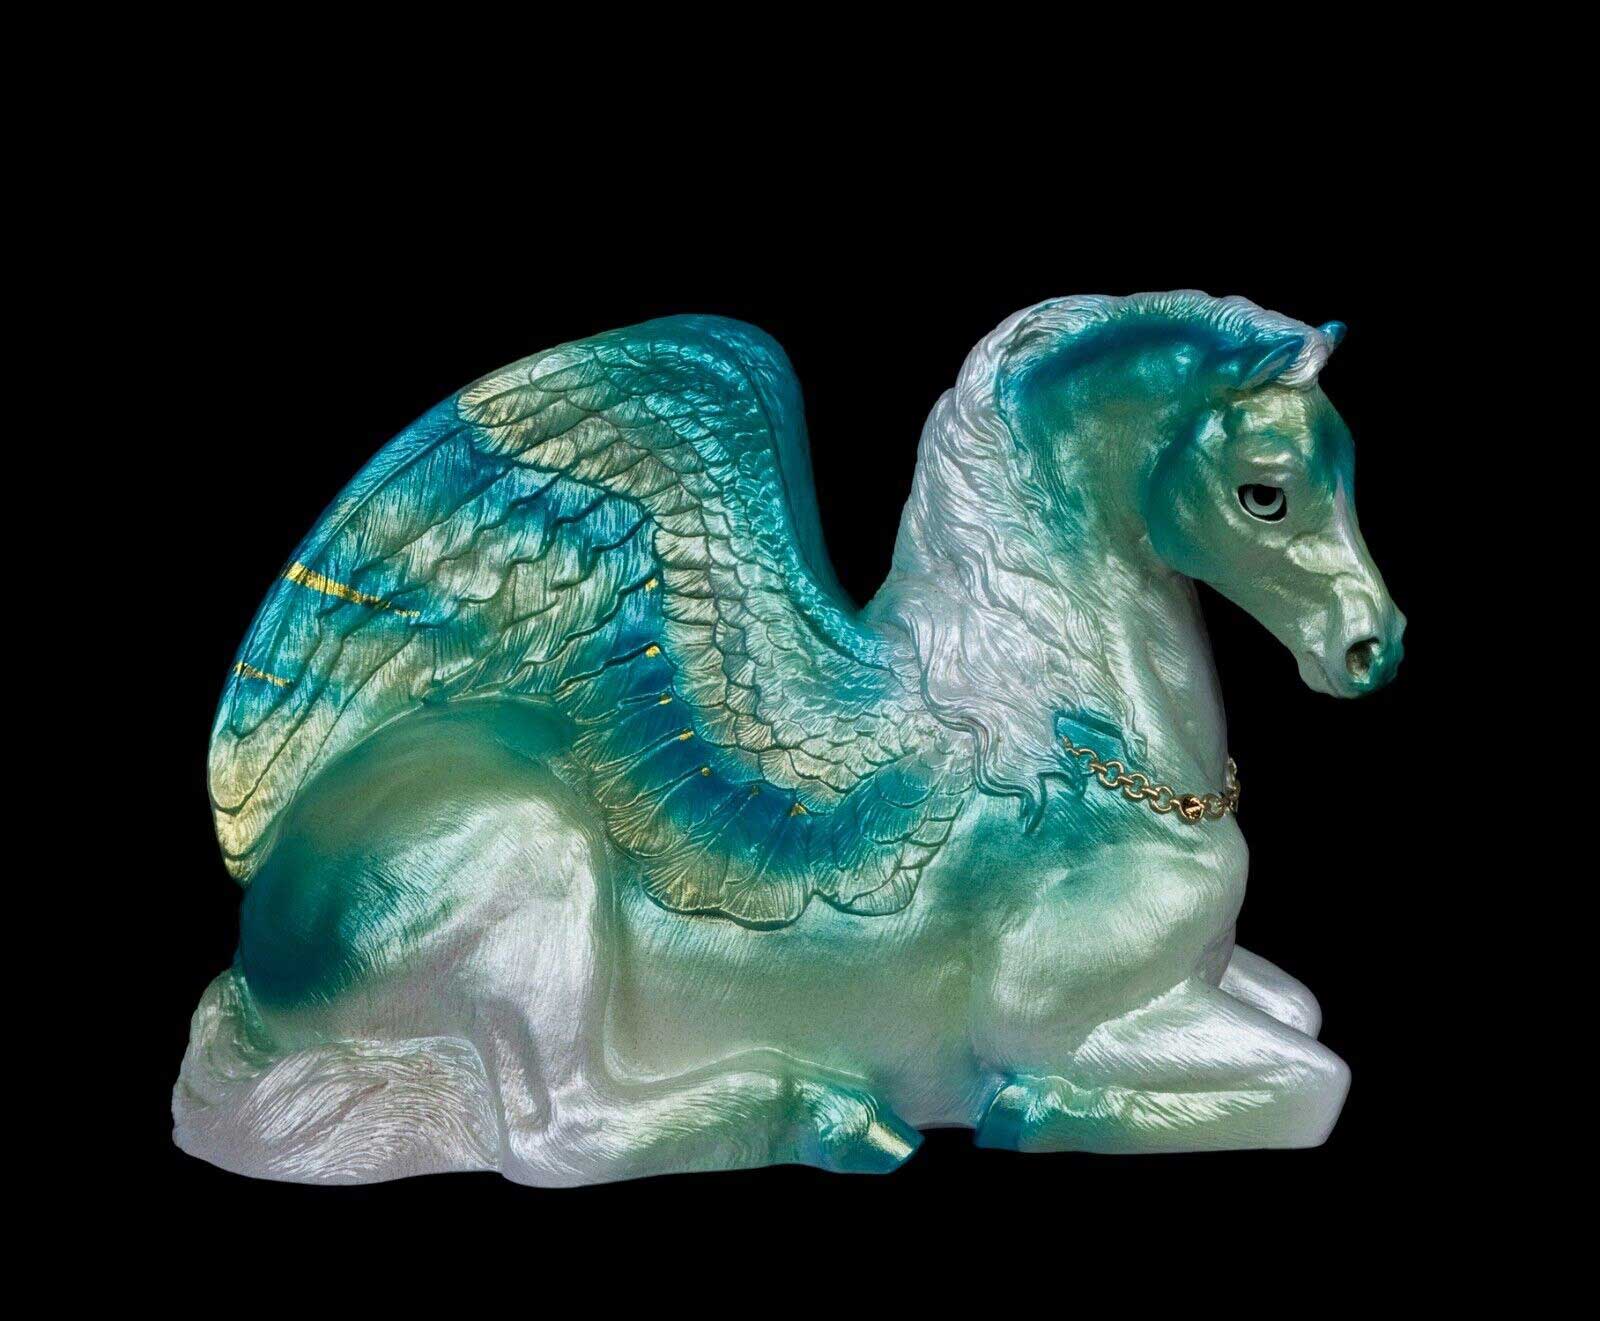 20230305-Seaglass-Mother-Pegasus-Test-Paint-1-by-Gina